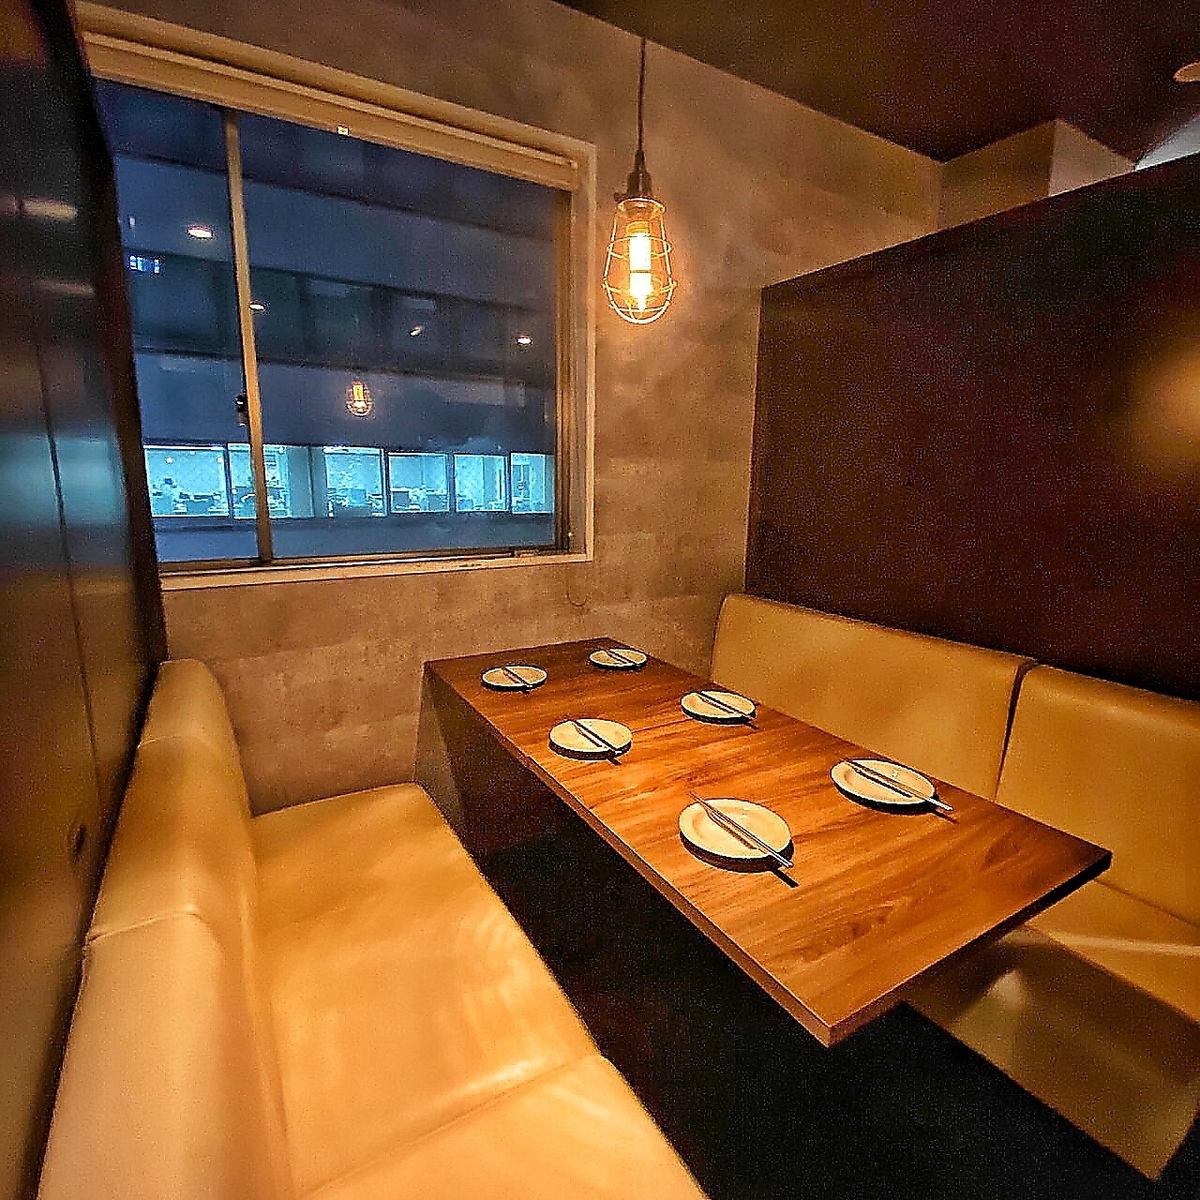 A completely private room with a night view is perfect for a date ◎